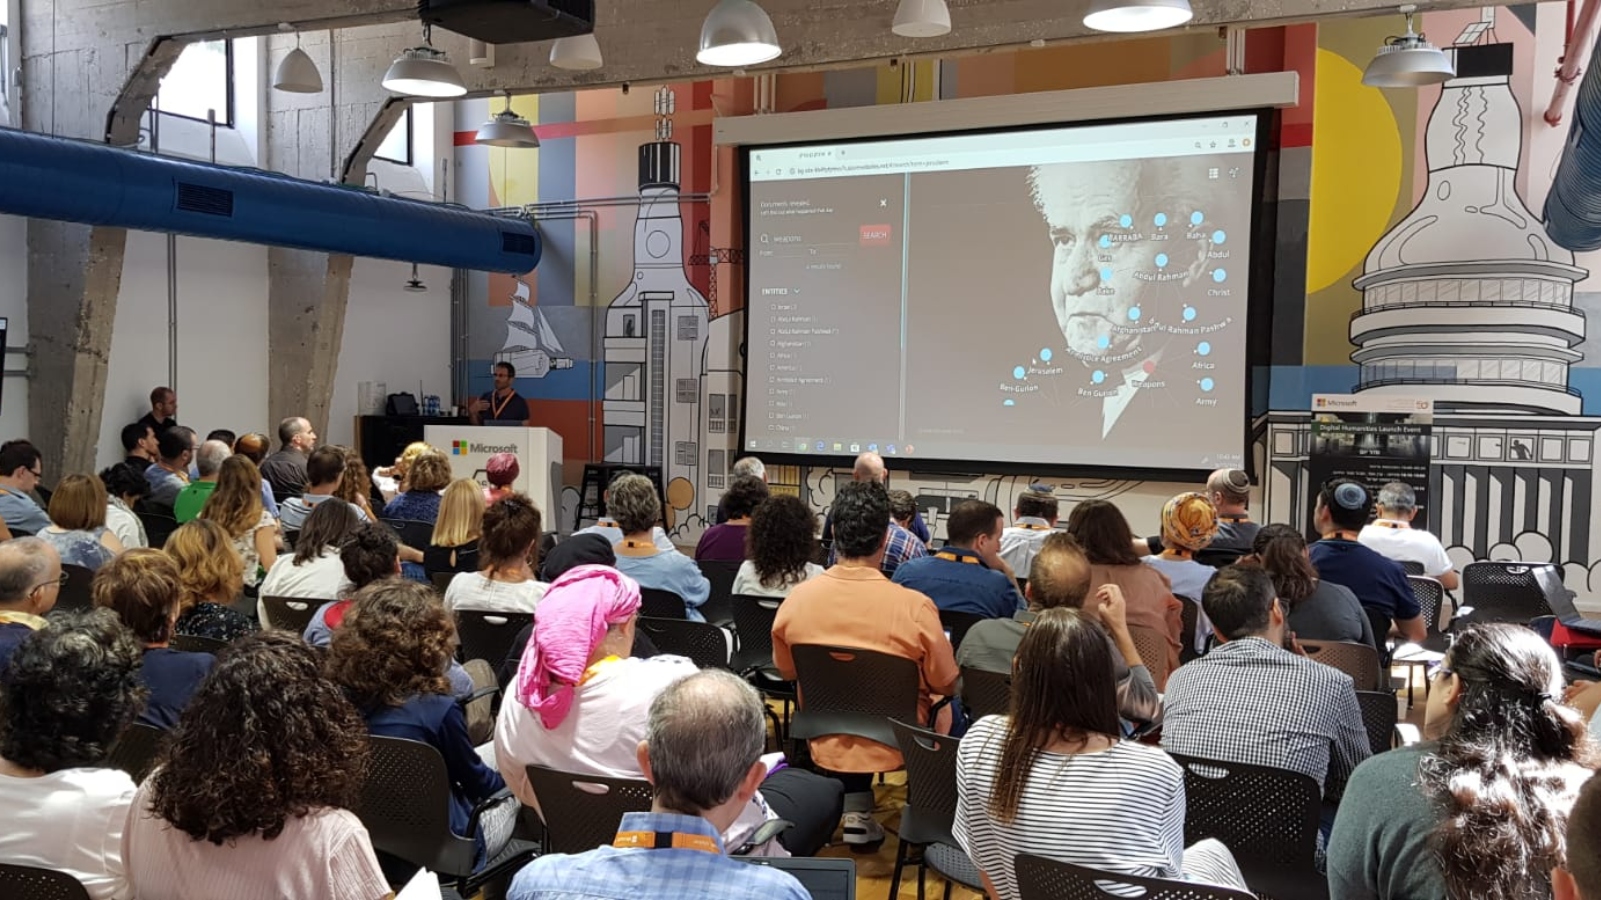 New tools to search the Ben-Gurion Archive were unveiled at the Digital Humanities Launch Event held in The Reactor, Microsoft Israel's innovation space. Photo courtesy of Ben-Gurion University Spokesman’s Office